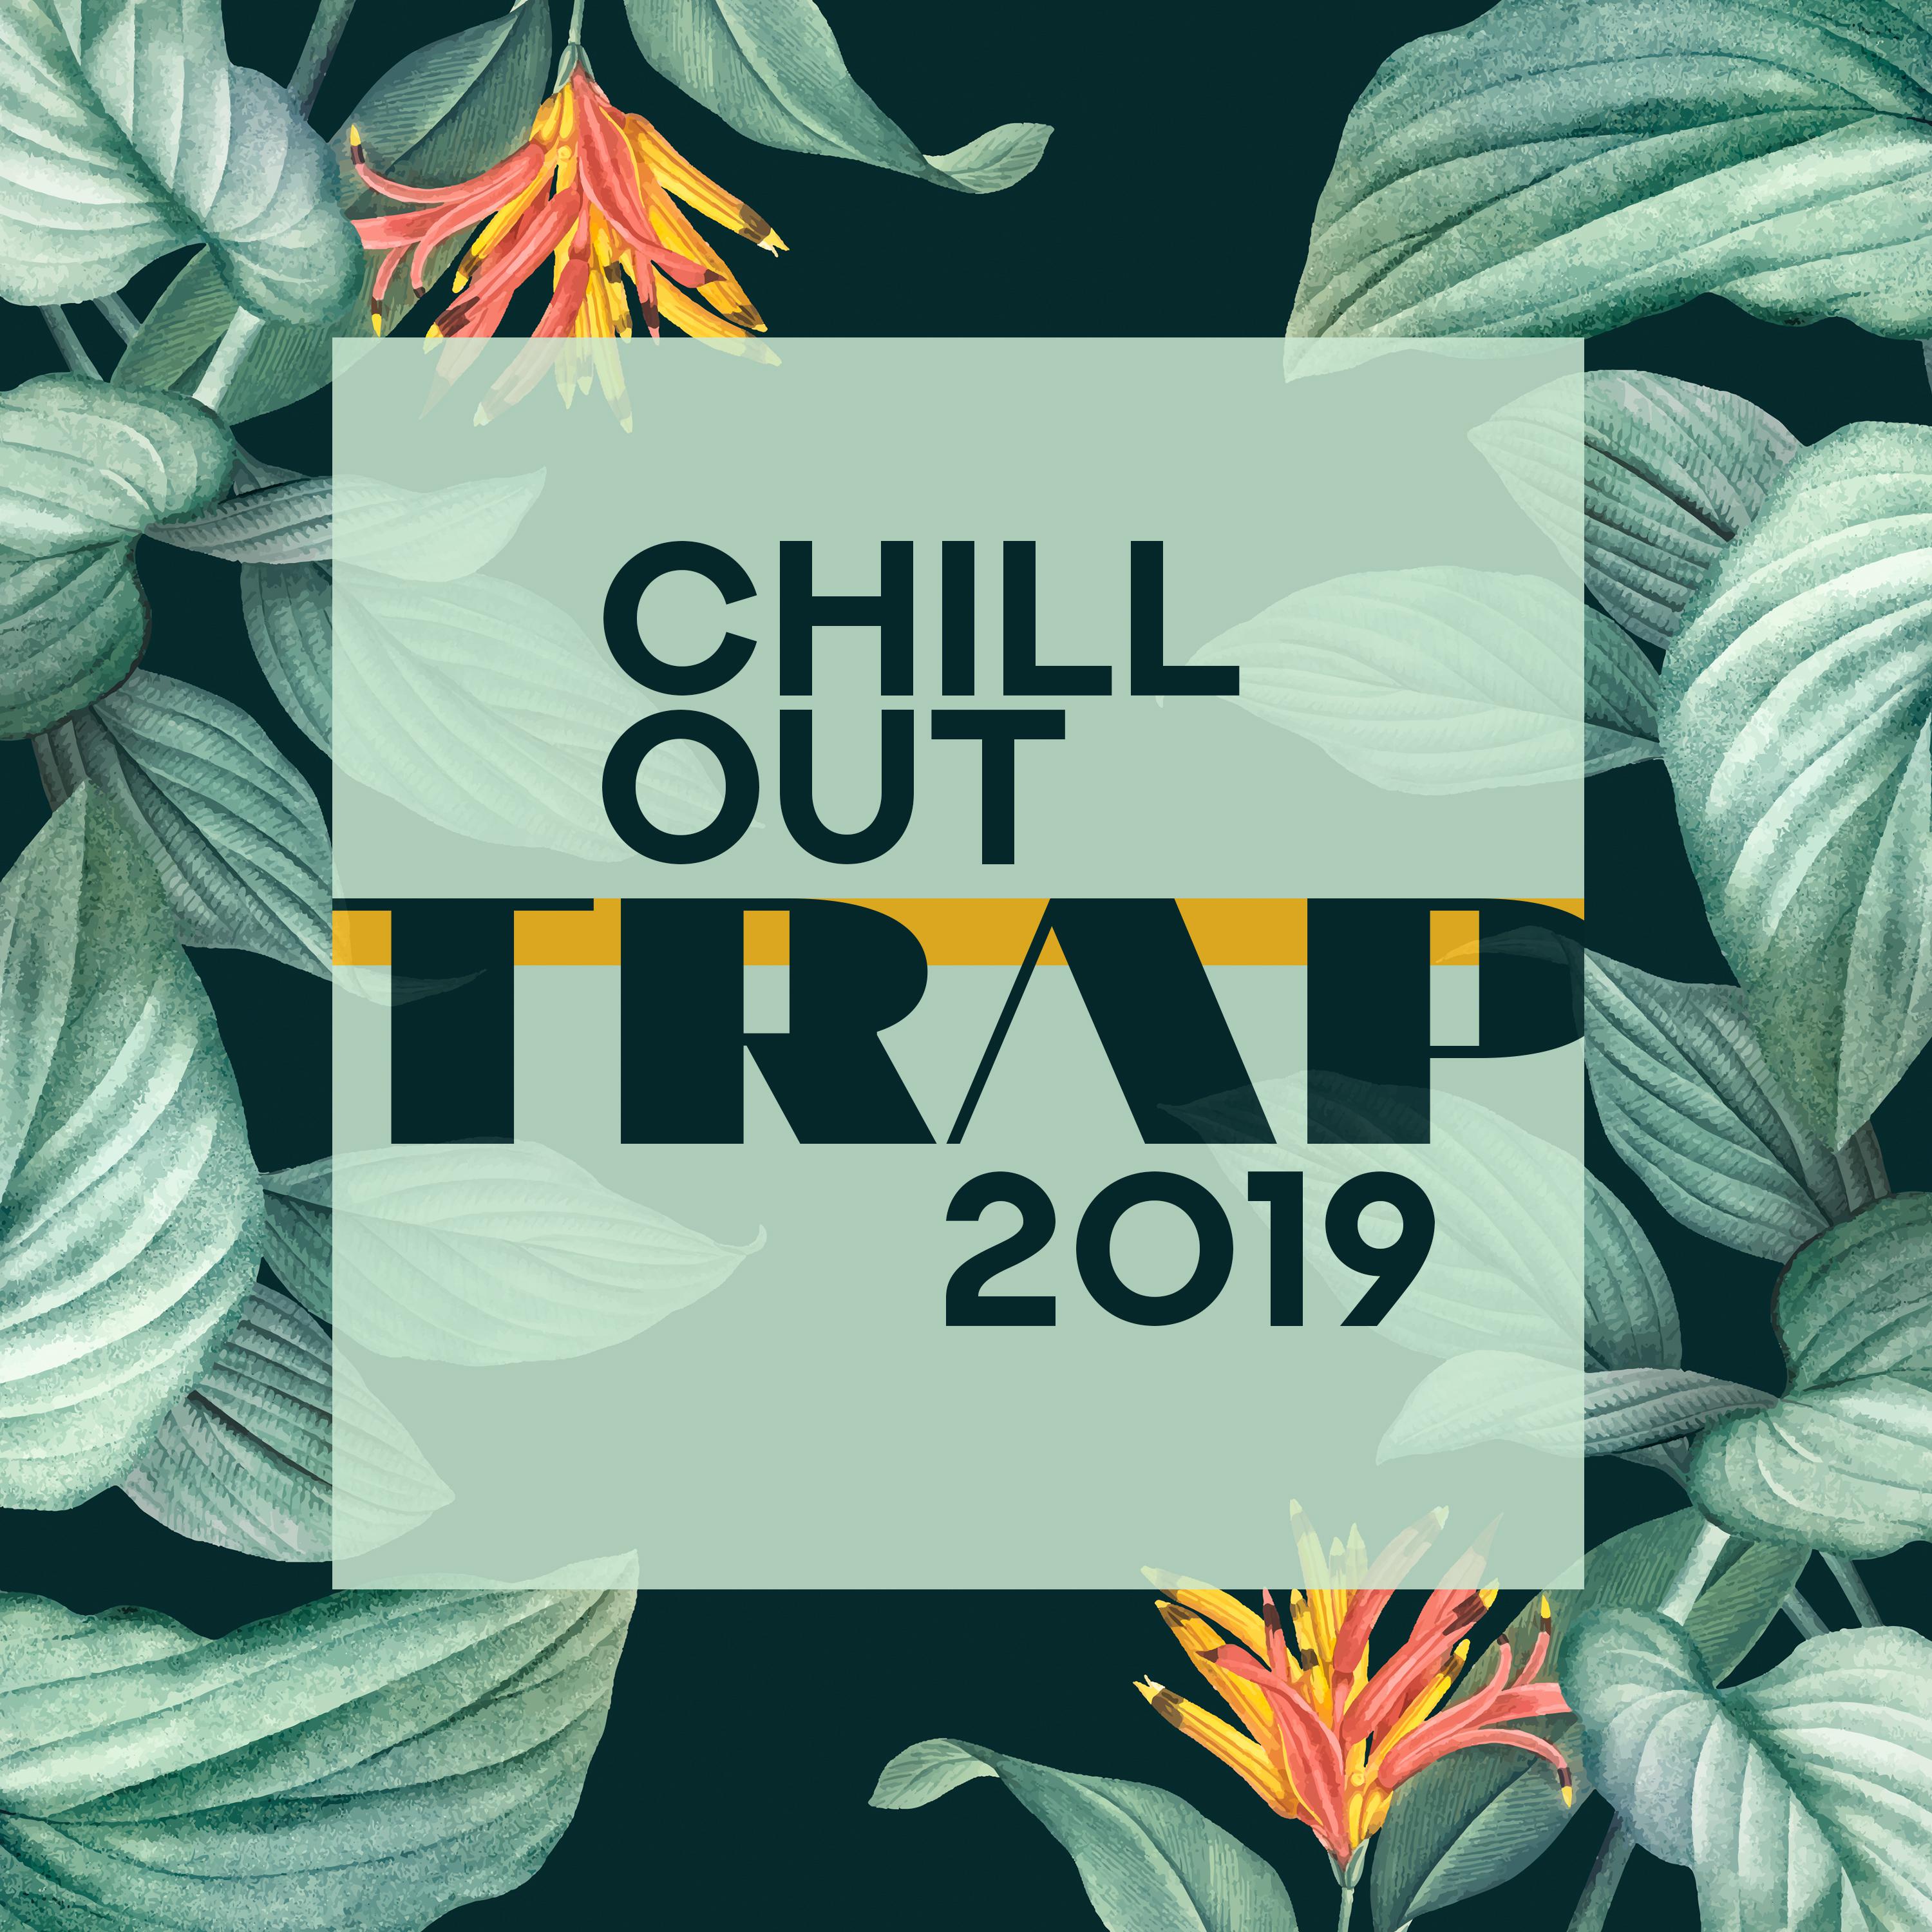 Chill Out Trap 2019 (Deep House Bass & Chill Pop R&B)